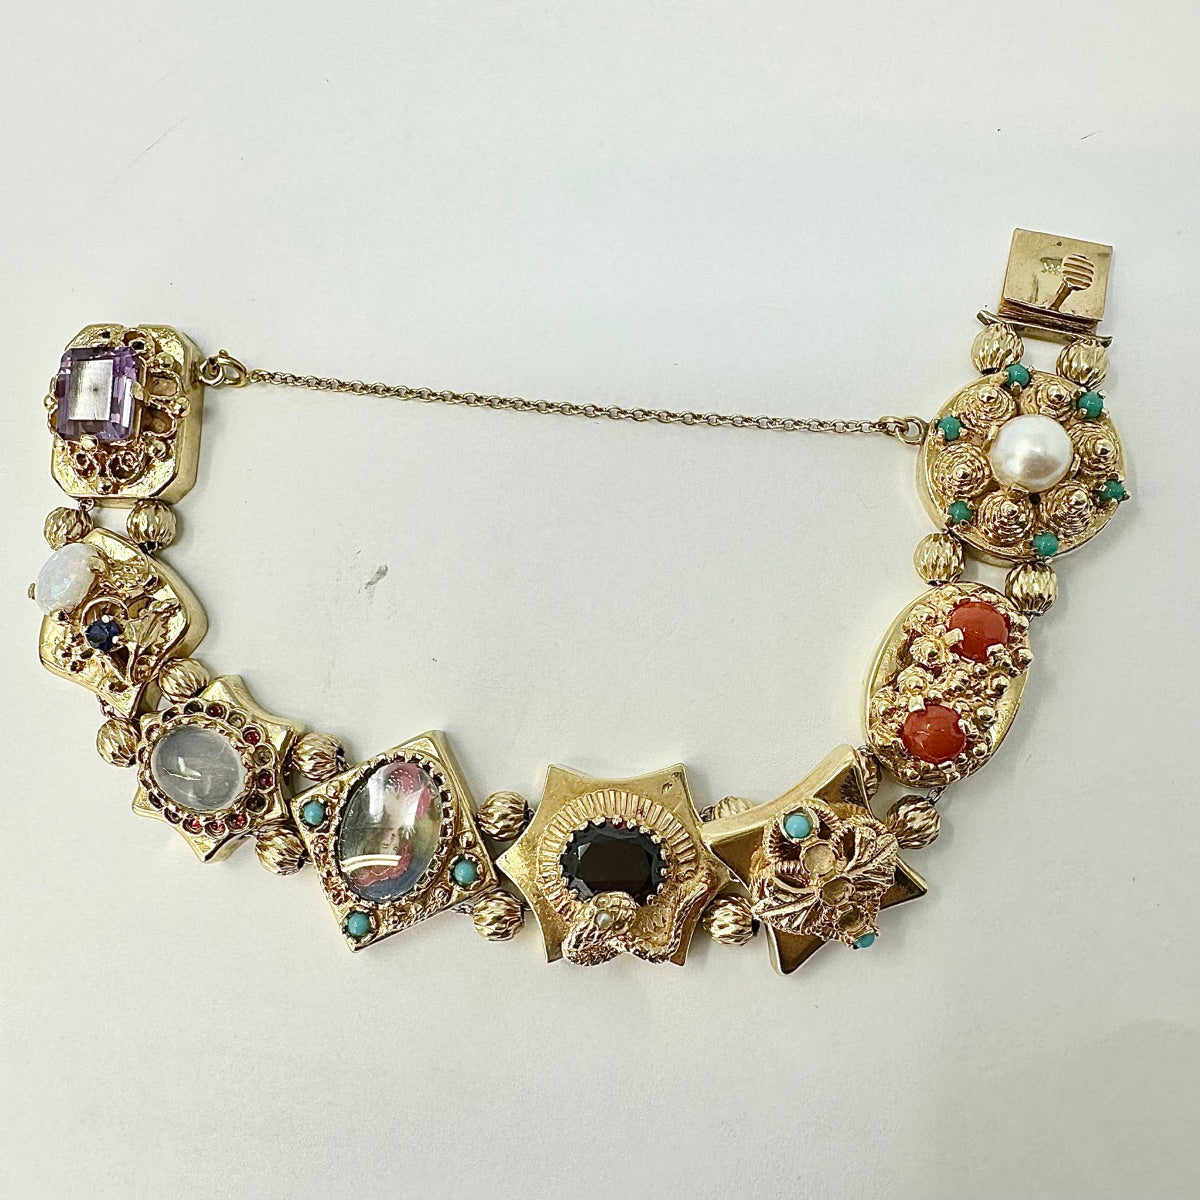 Vintage 14K Gold Slide Bracelet with Semiprecious Stones and Pearls